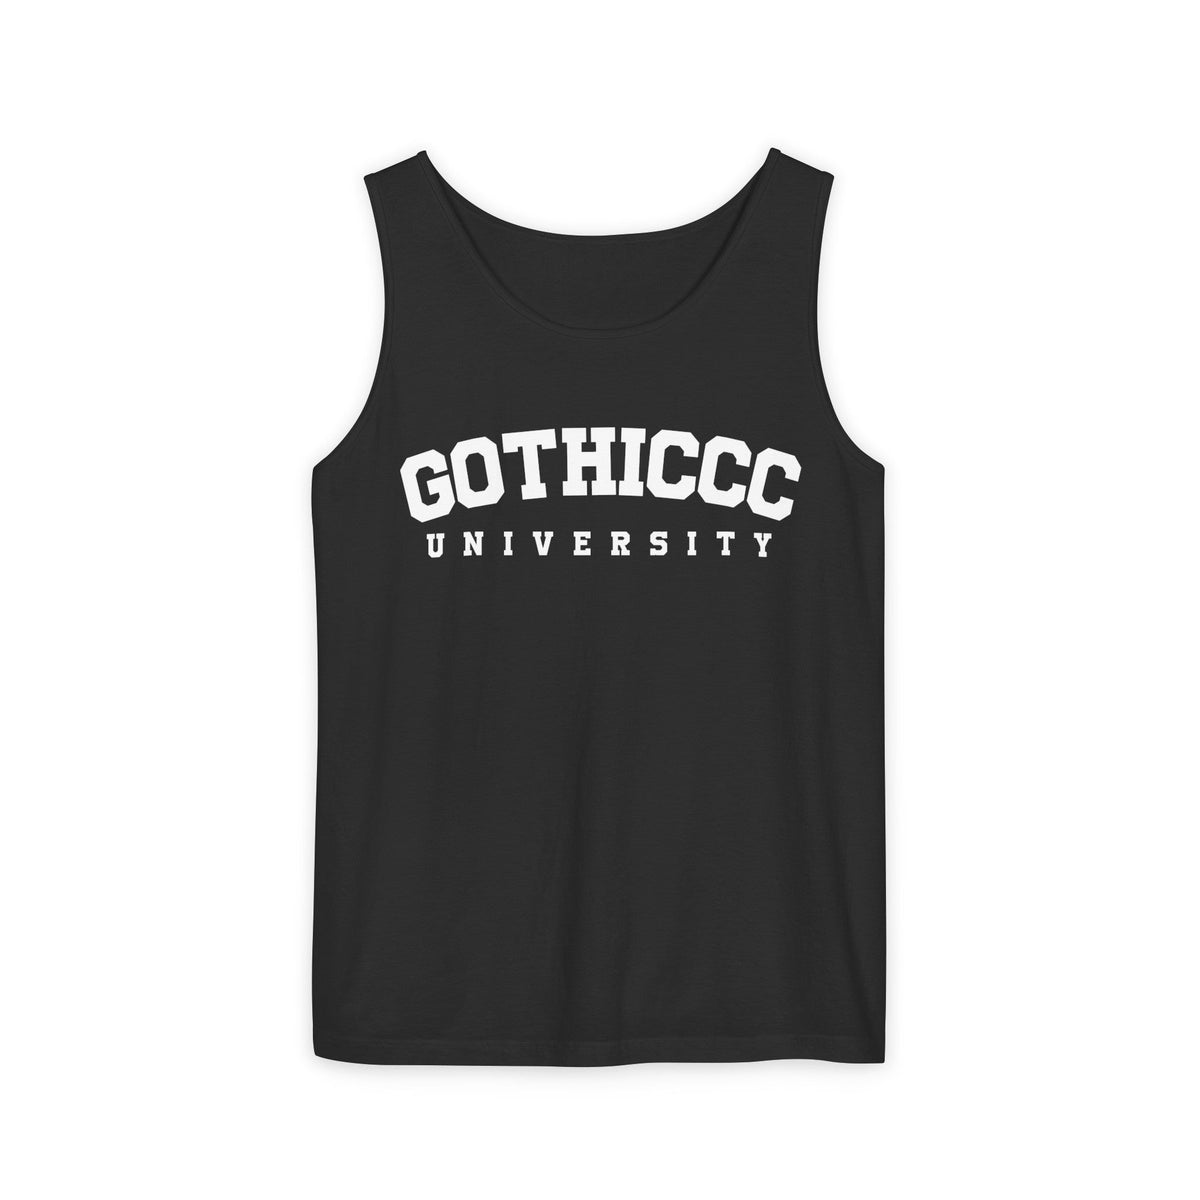 Gothiccc University Unisex Tank Top - Goth Cloth Co.Tank Top24499873609423790484